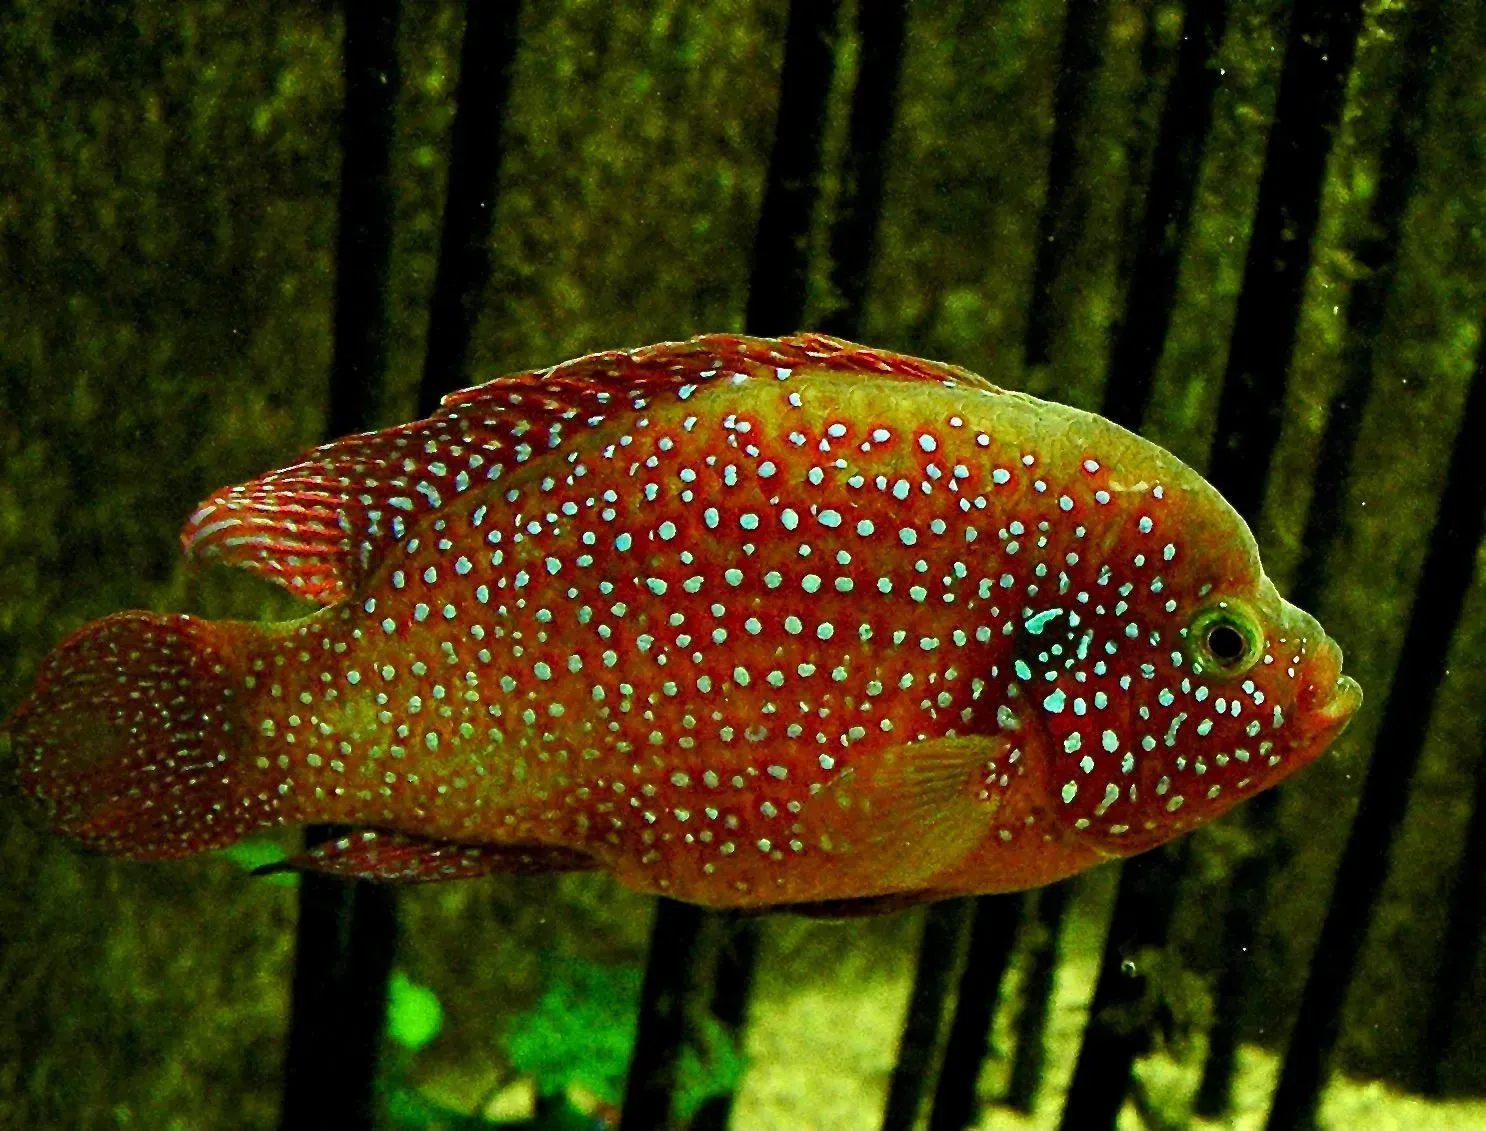 A beautiful freshwater jewel cichlid found in canals.